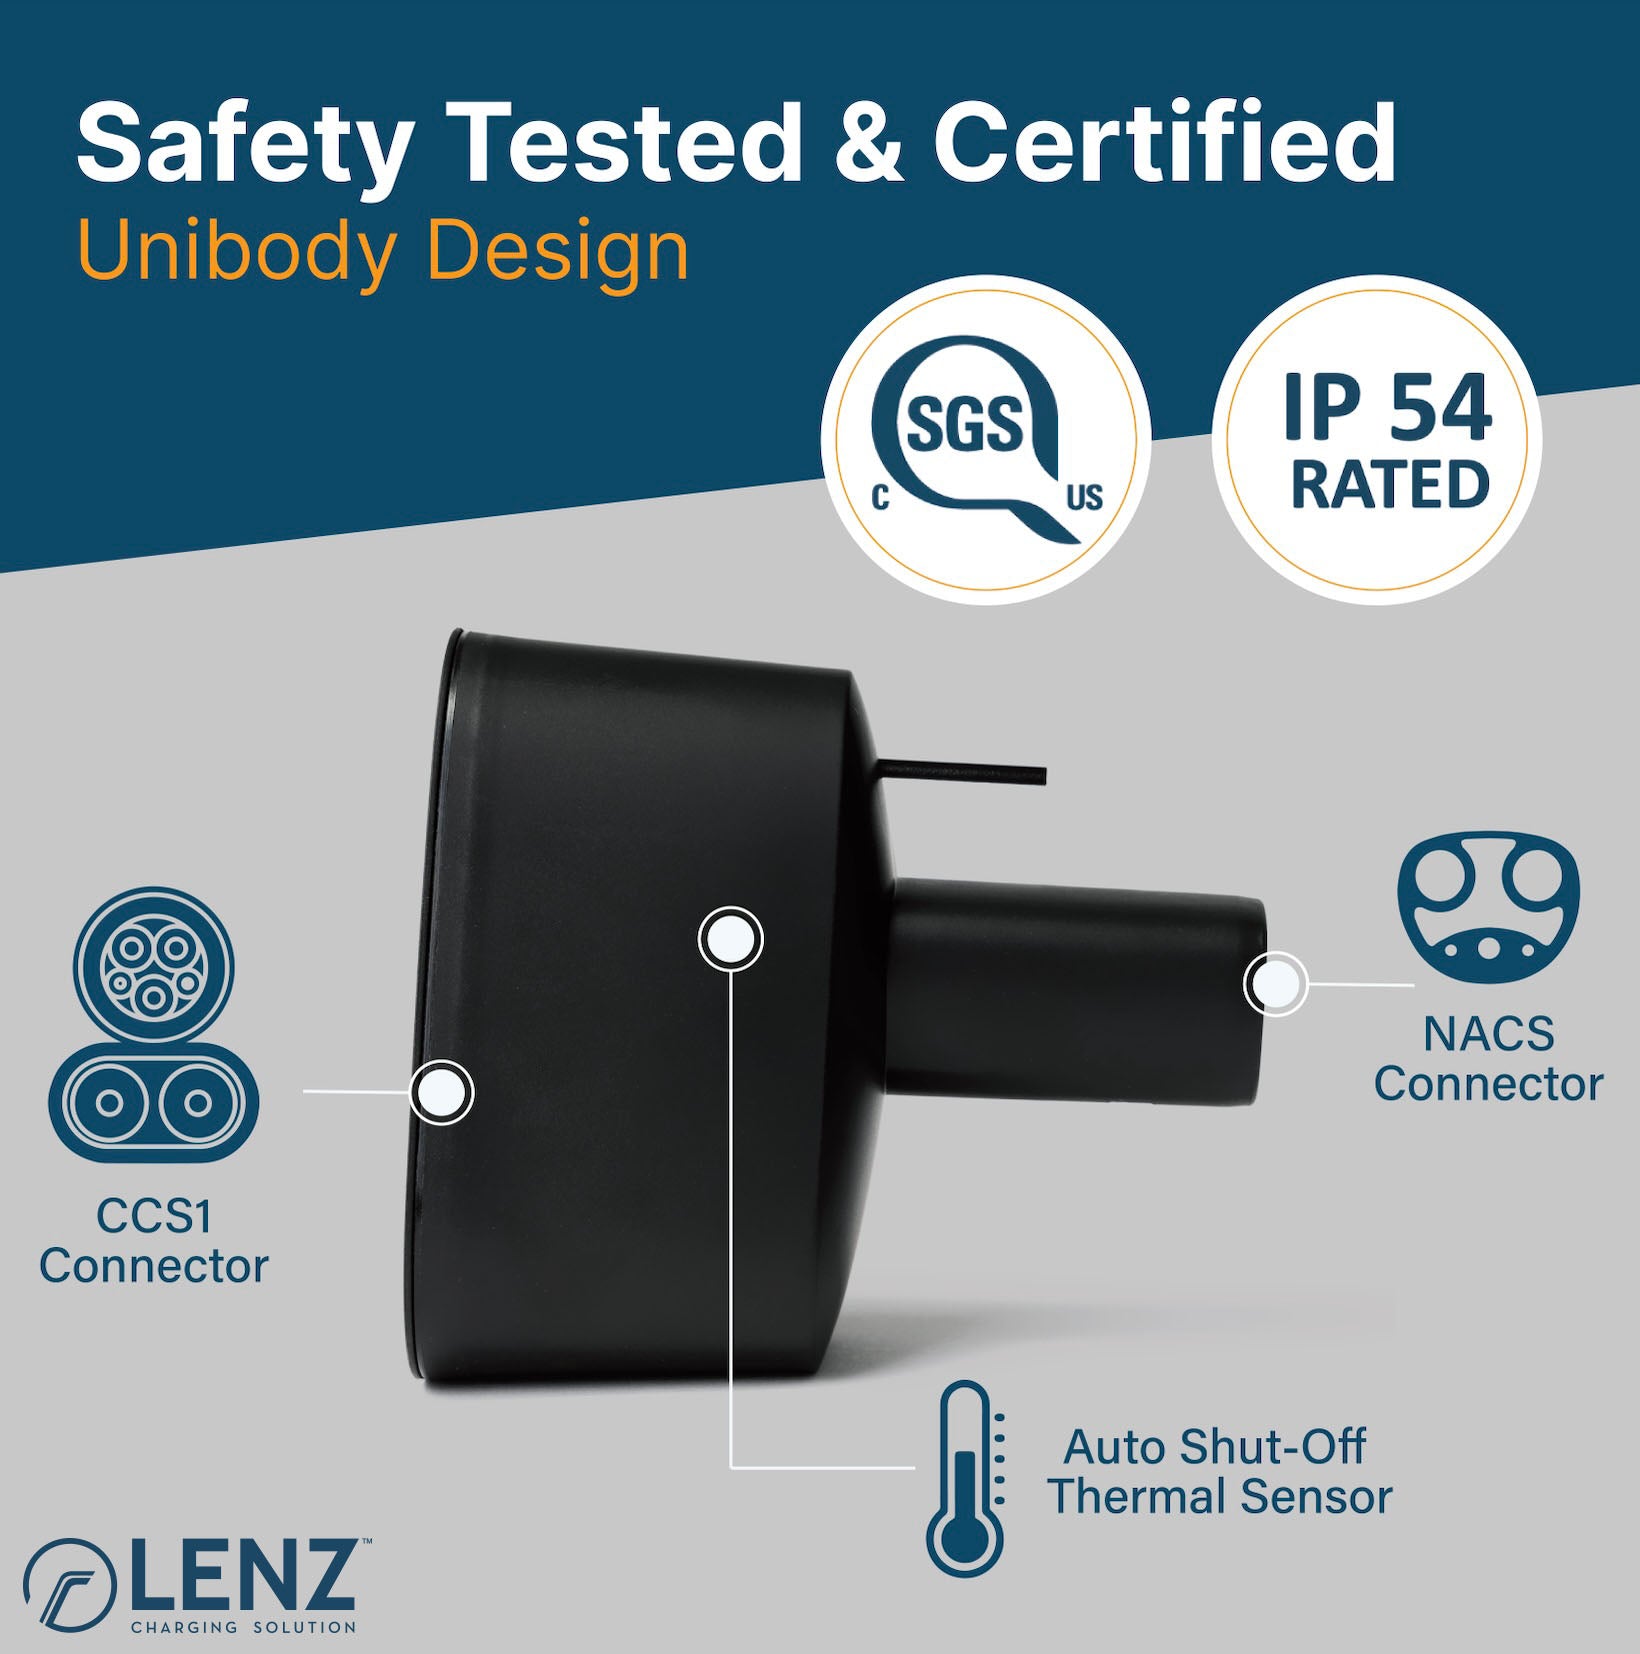 LENZ CCS1 Adapter profile with SGS certification seal and IP54 Rating seal